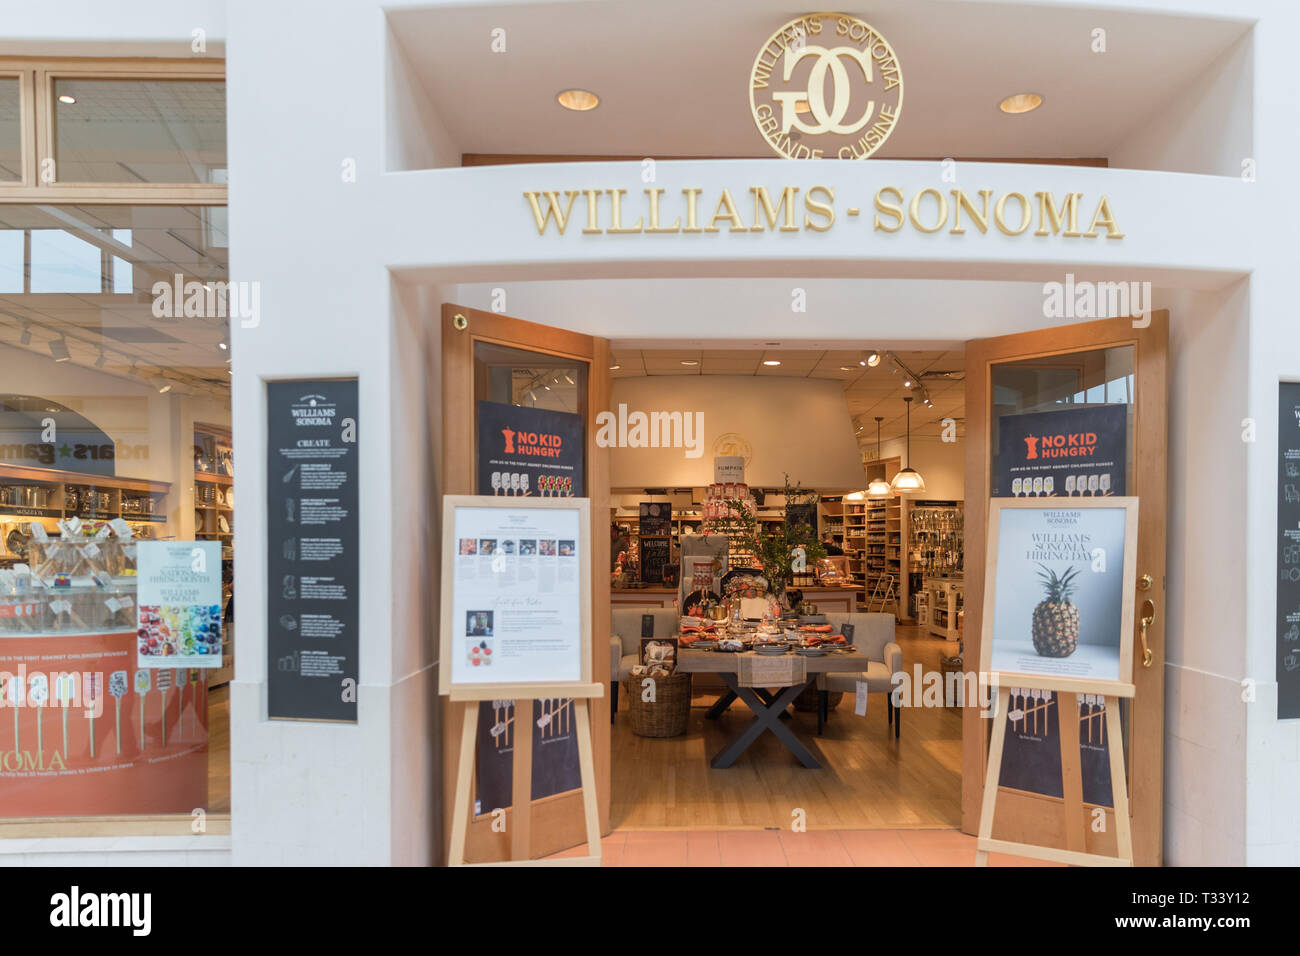 479 Williams Sonoma Images, Stock Photos, 3D objects, & Vectors